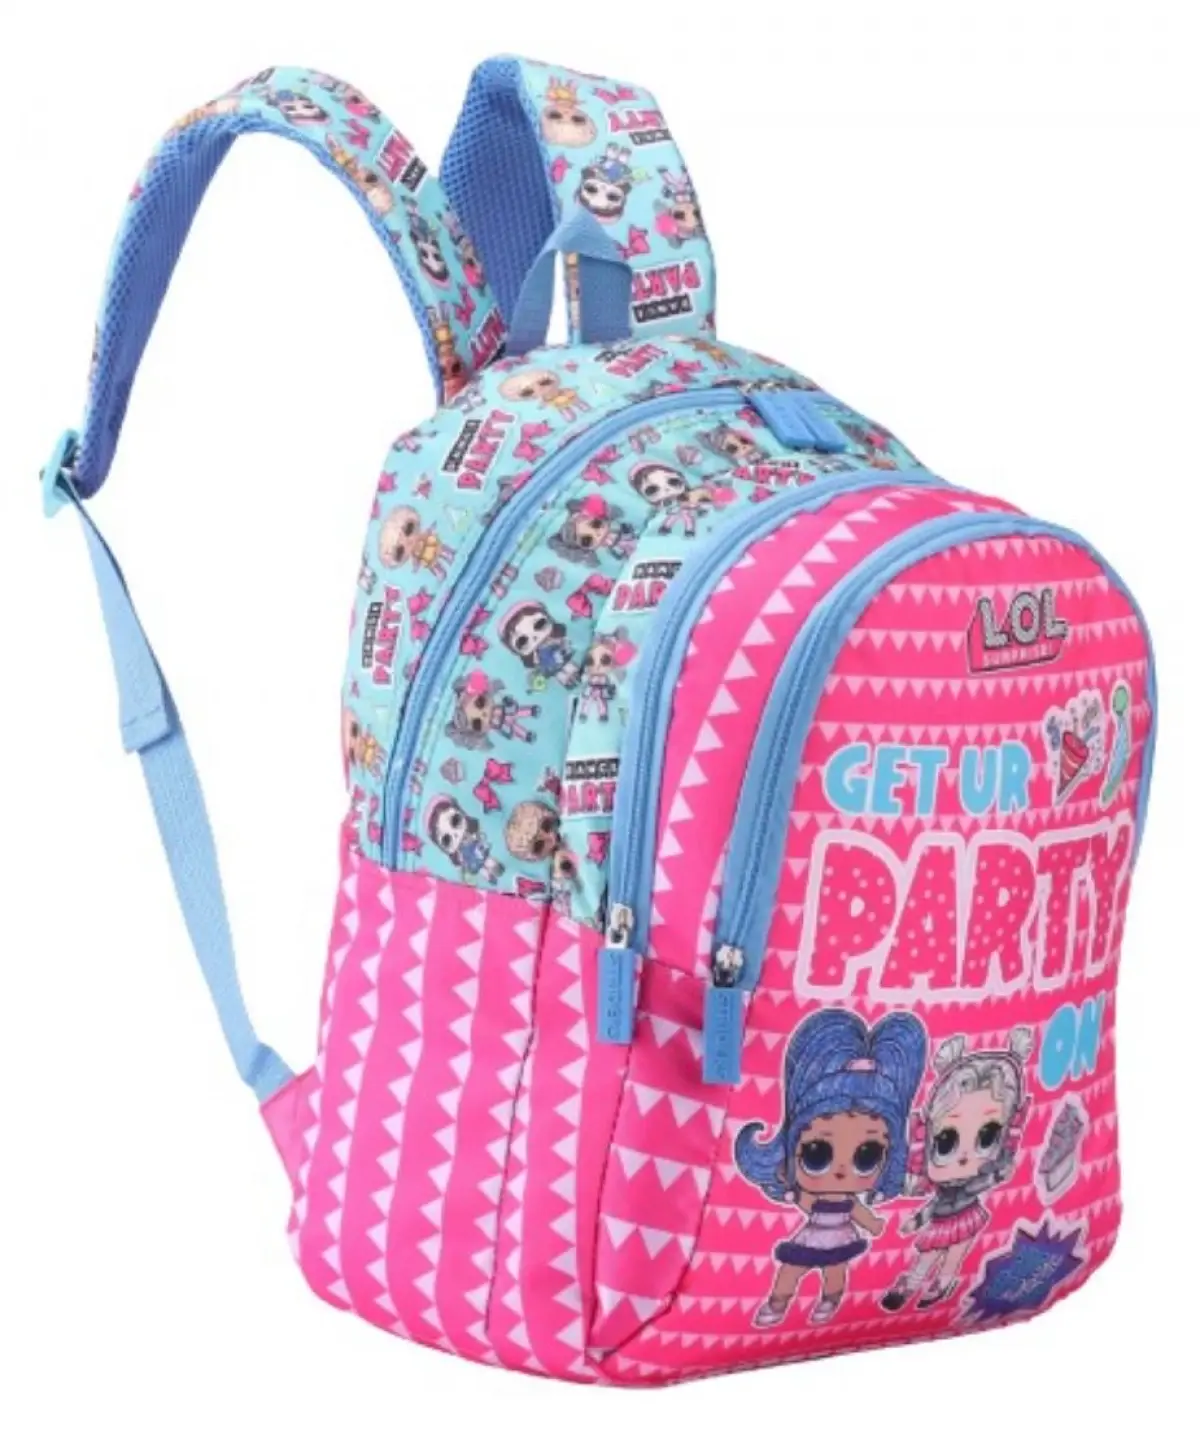 Striders 16 inches LOL Surprise School Bag - Trendy Style for Little Fashionistas Multicolor For Kids Ages 6Y+